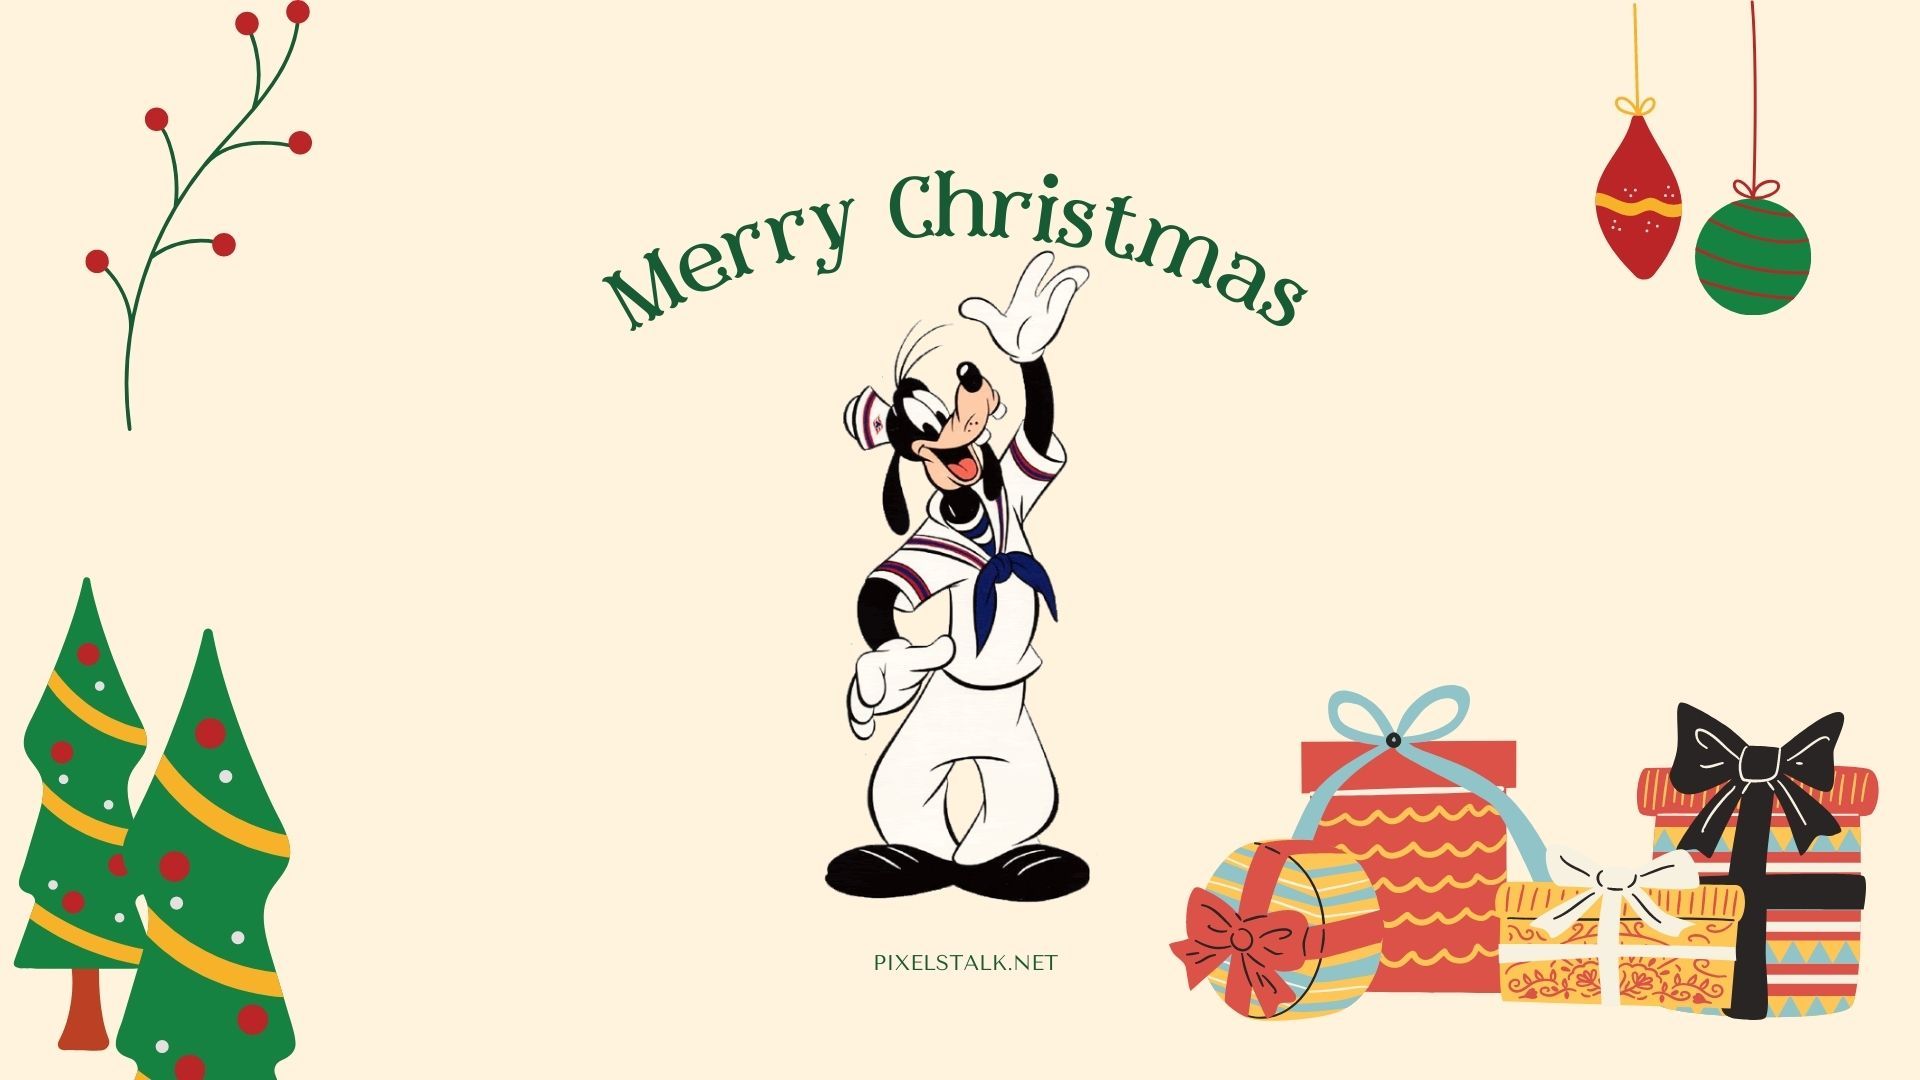 Goofy in a sailor suit waving with a Merry Christmas message - Disney